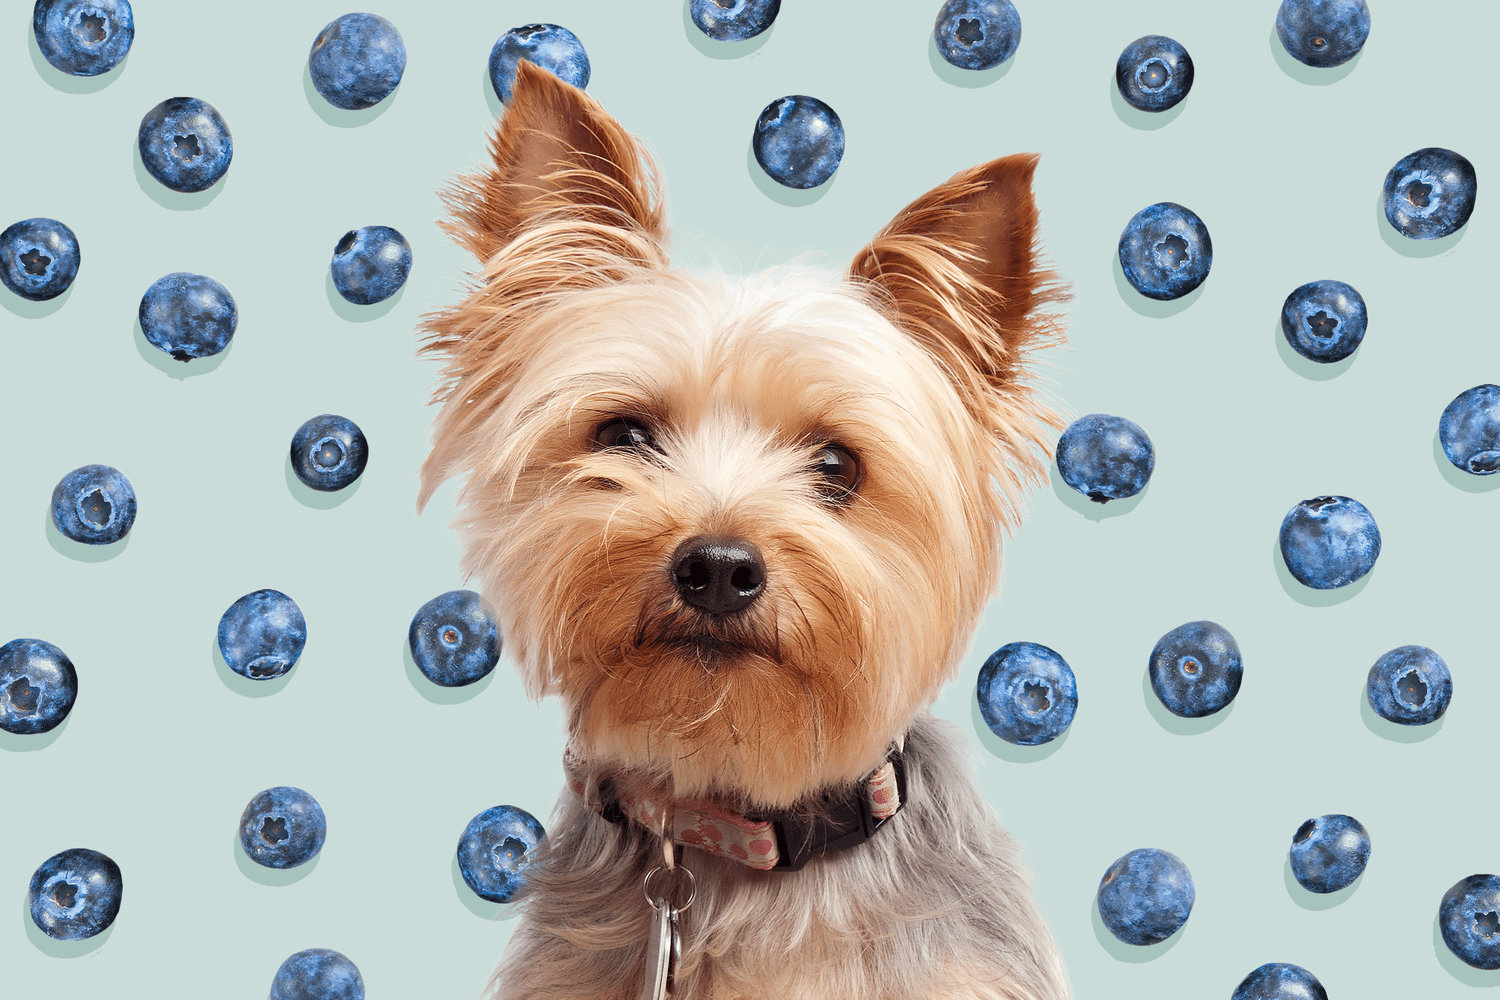 Can Maltese Dogs Eat Blueberries?